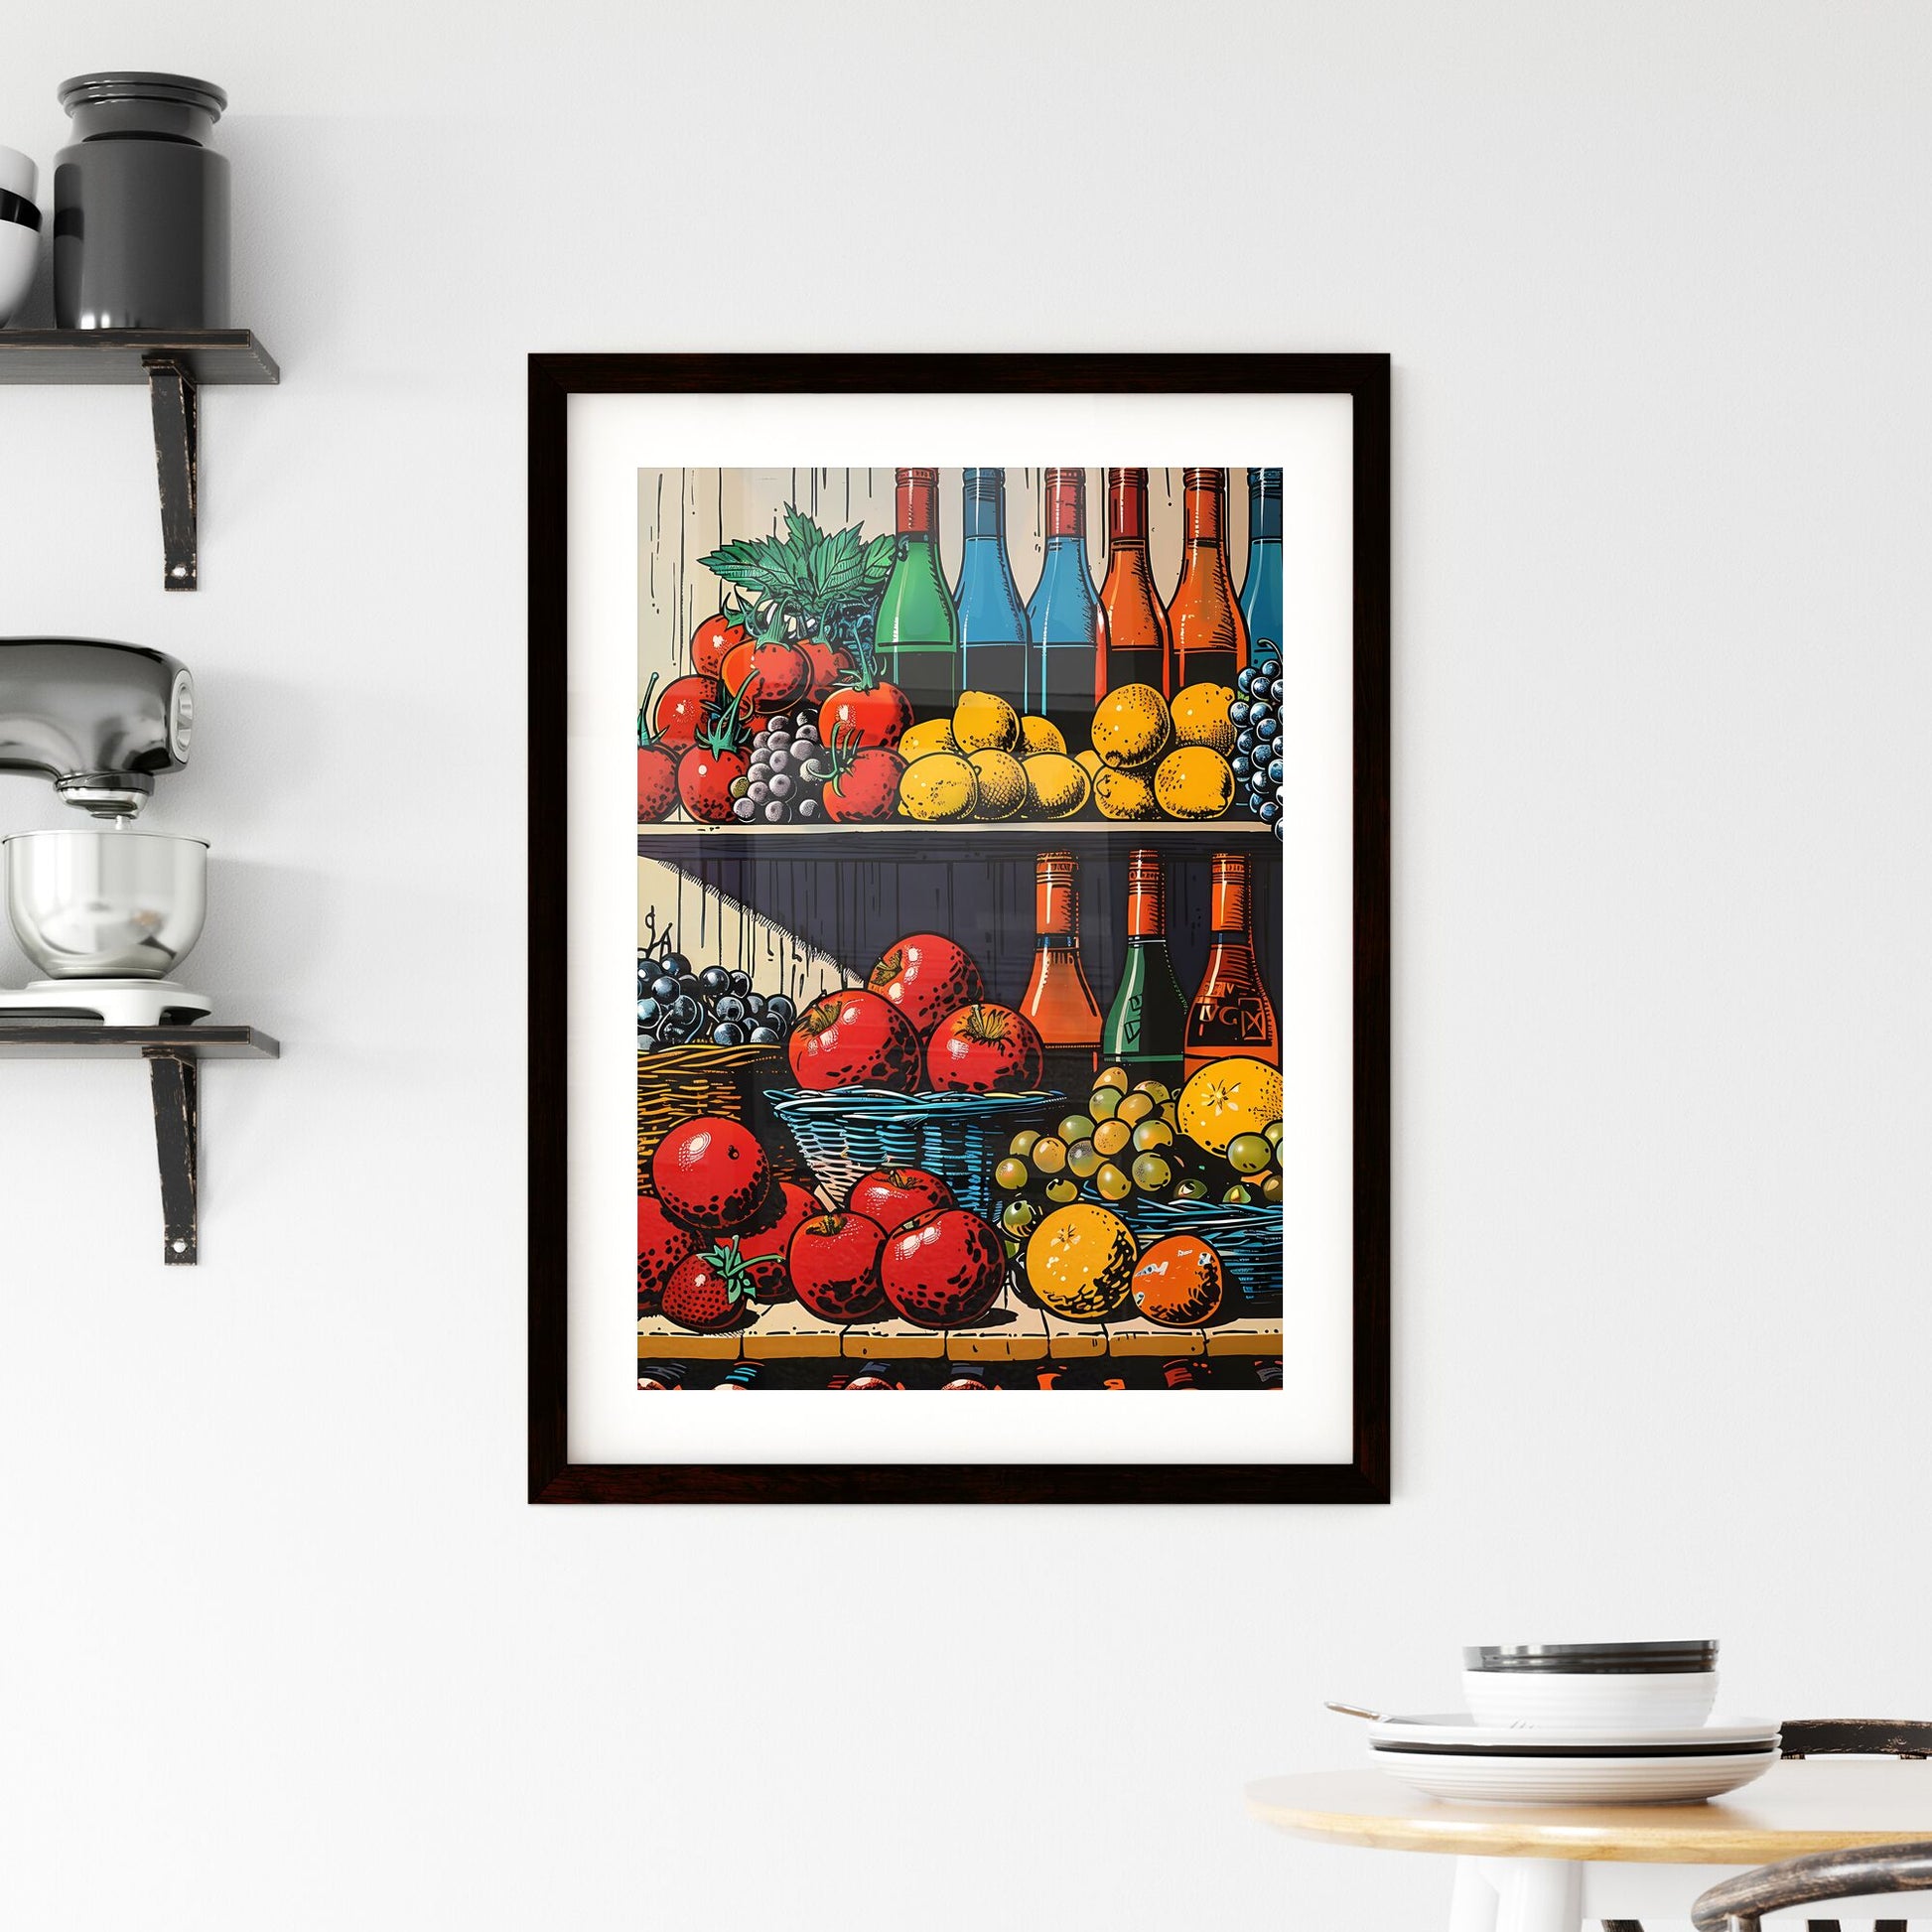 Minimalist Still Life Pop Art: Fruits and Veggies on a Shelf in a Bold and Ironic Consumerist Context Default Title